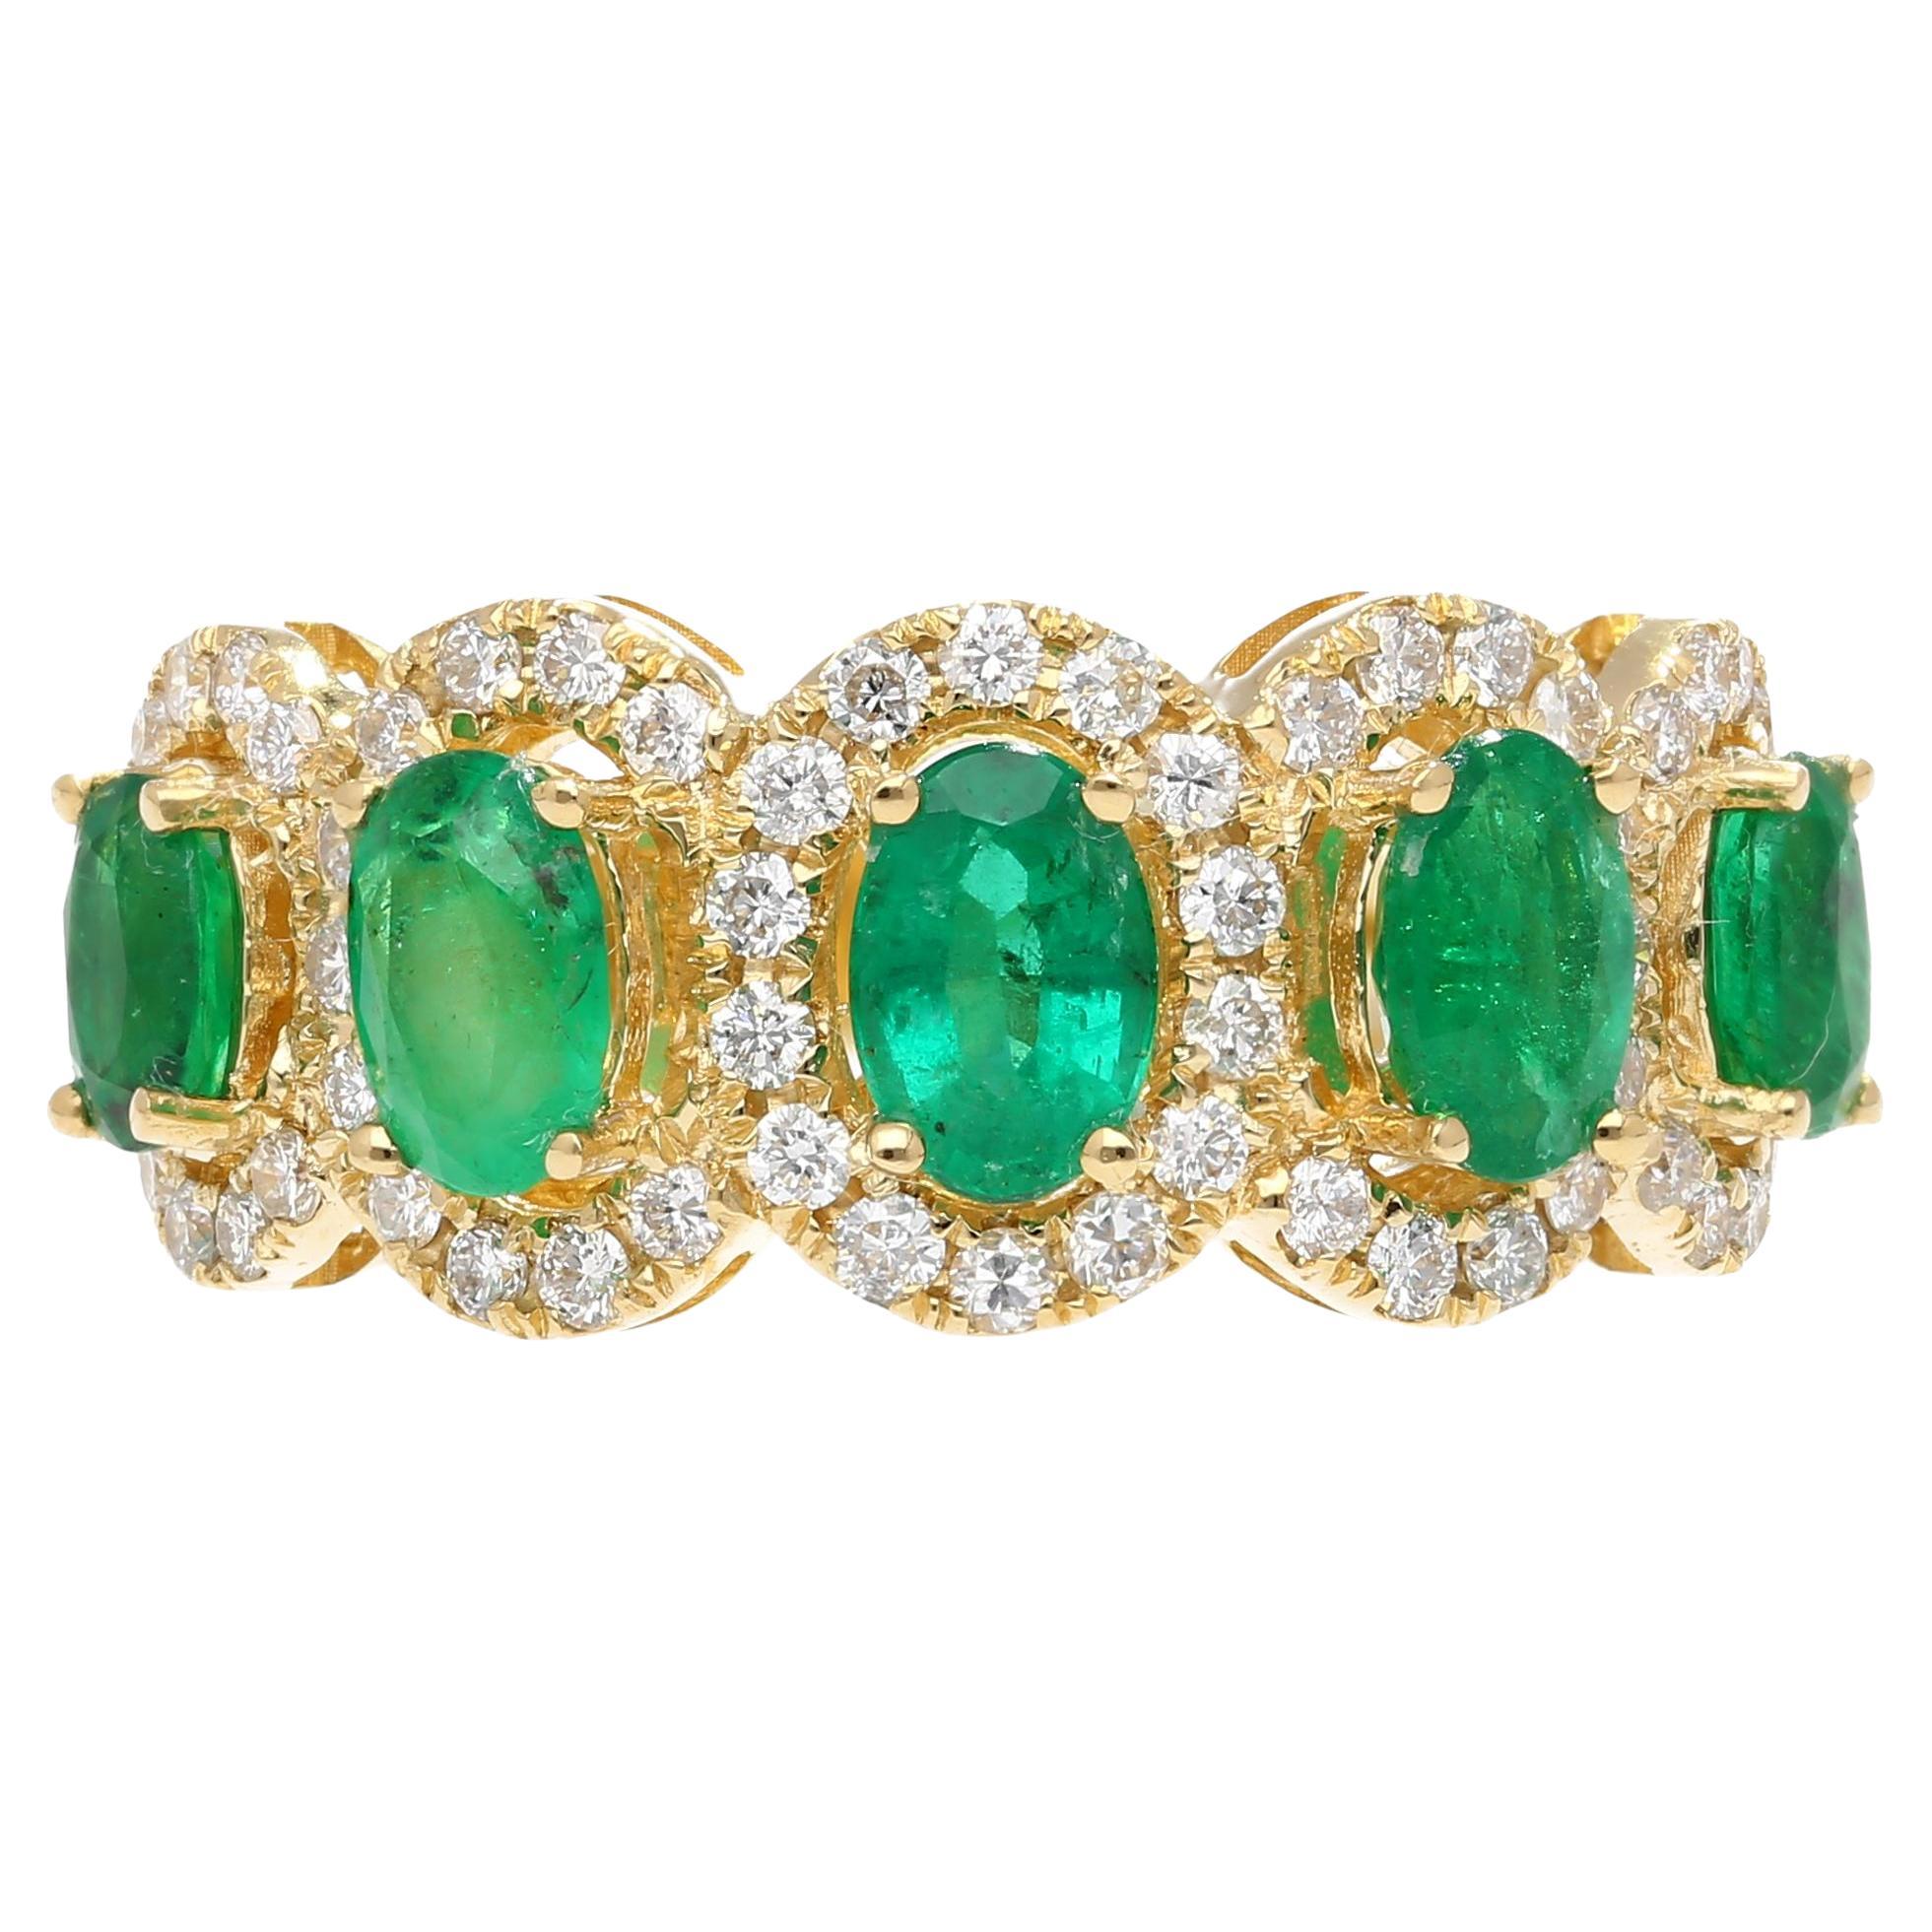 2.11 Carat Oval Cut Emerald and Diamond Wedding Band in 18K Gold For Sale